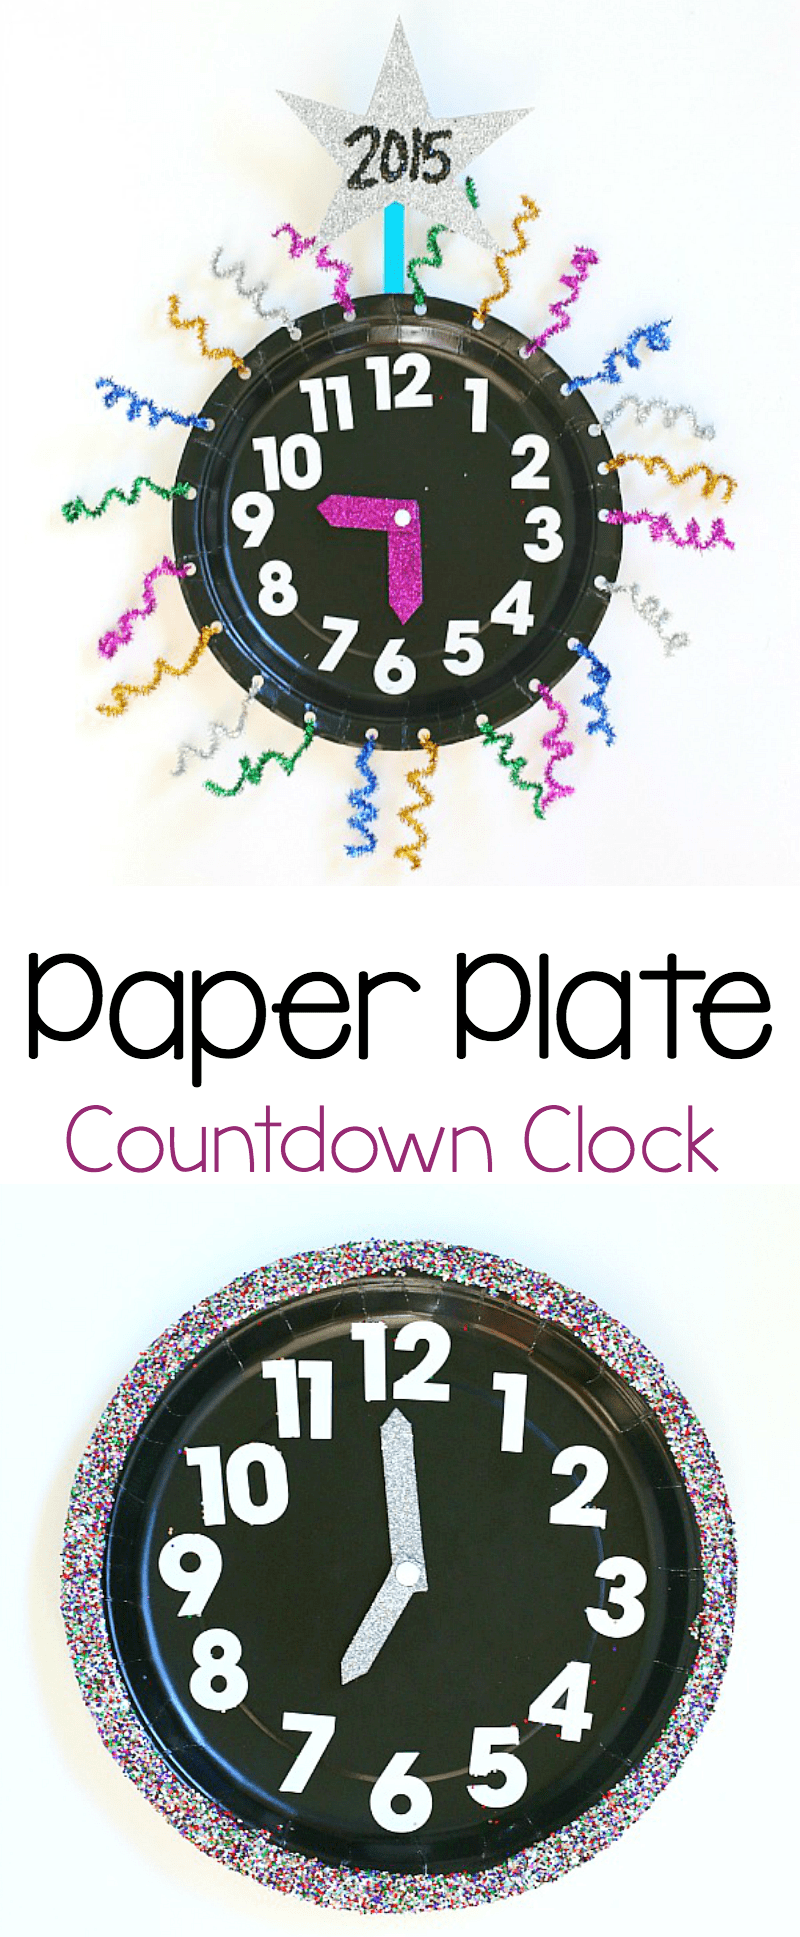 paper plate countdown clock craft for new year's eve